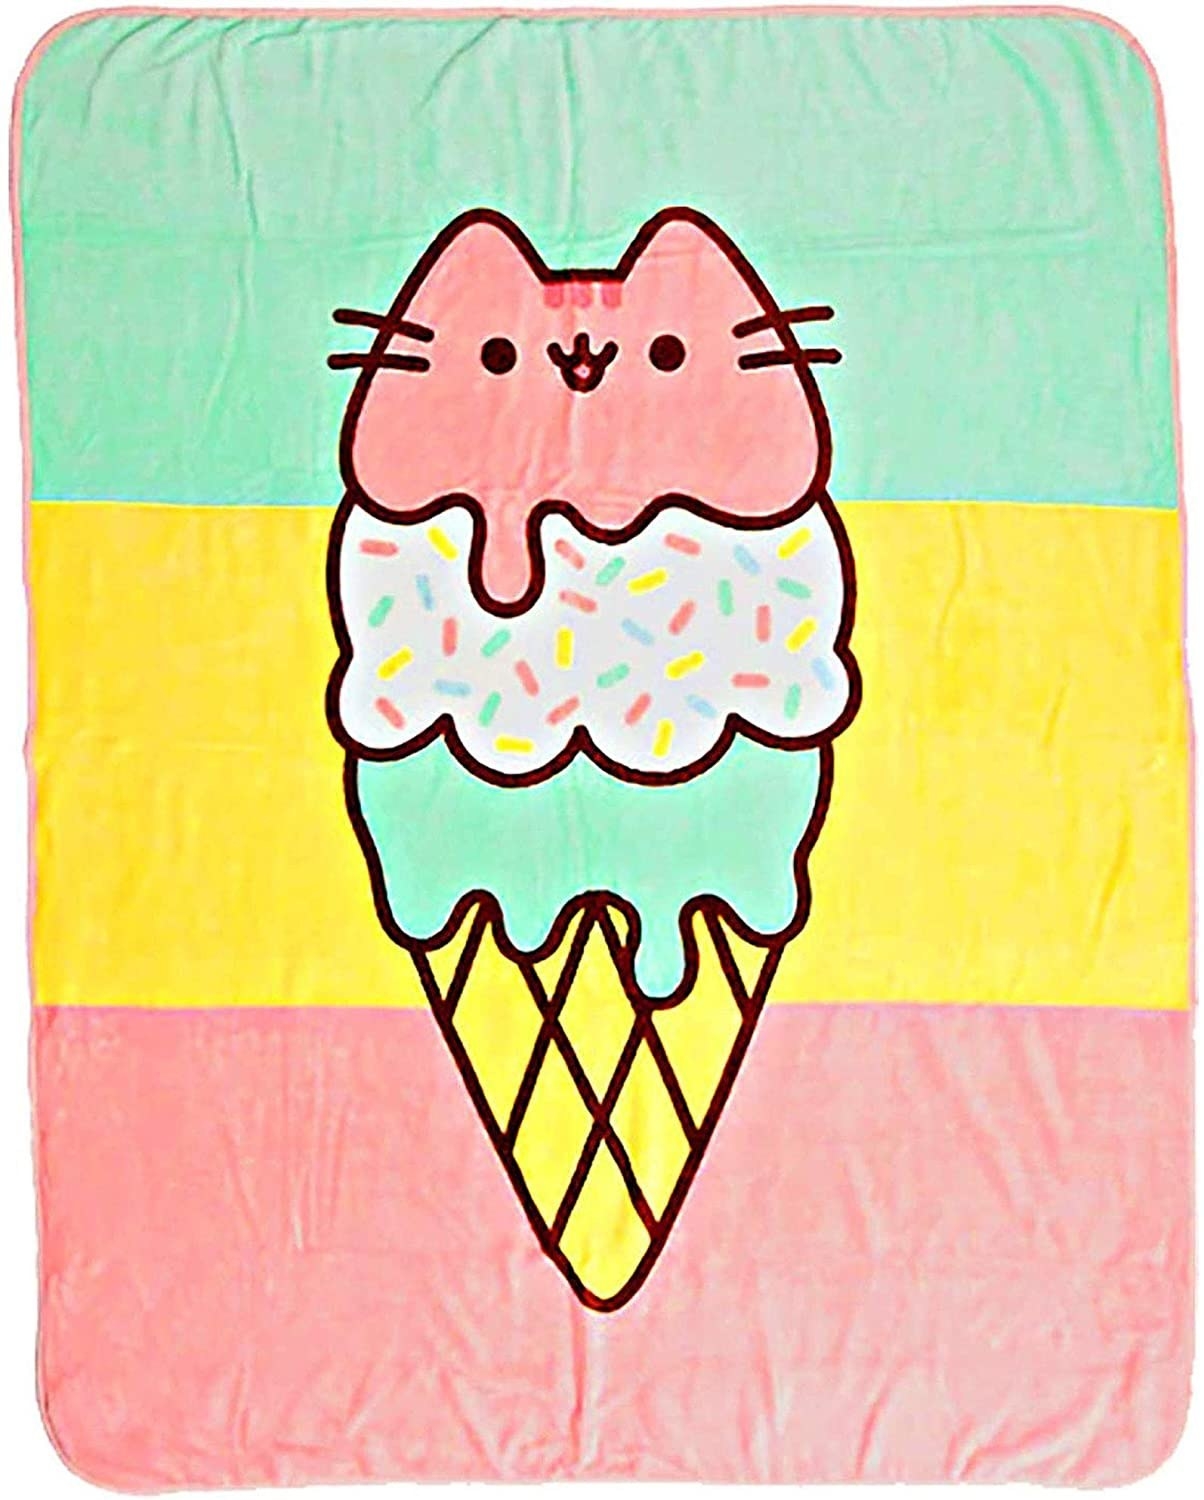 The pink, yellow, and green blanket featuring an ice cream cone with three scoops. The top one looks like Pusheen&#x27;s face